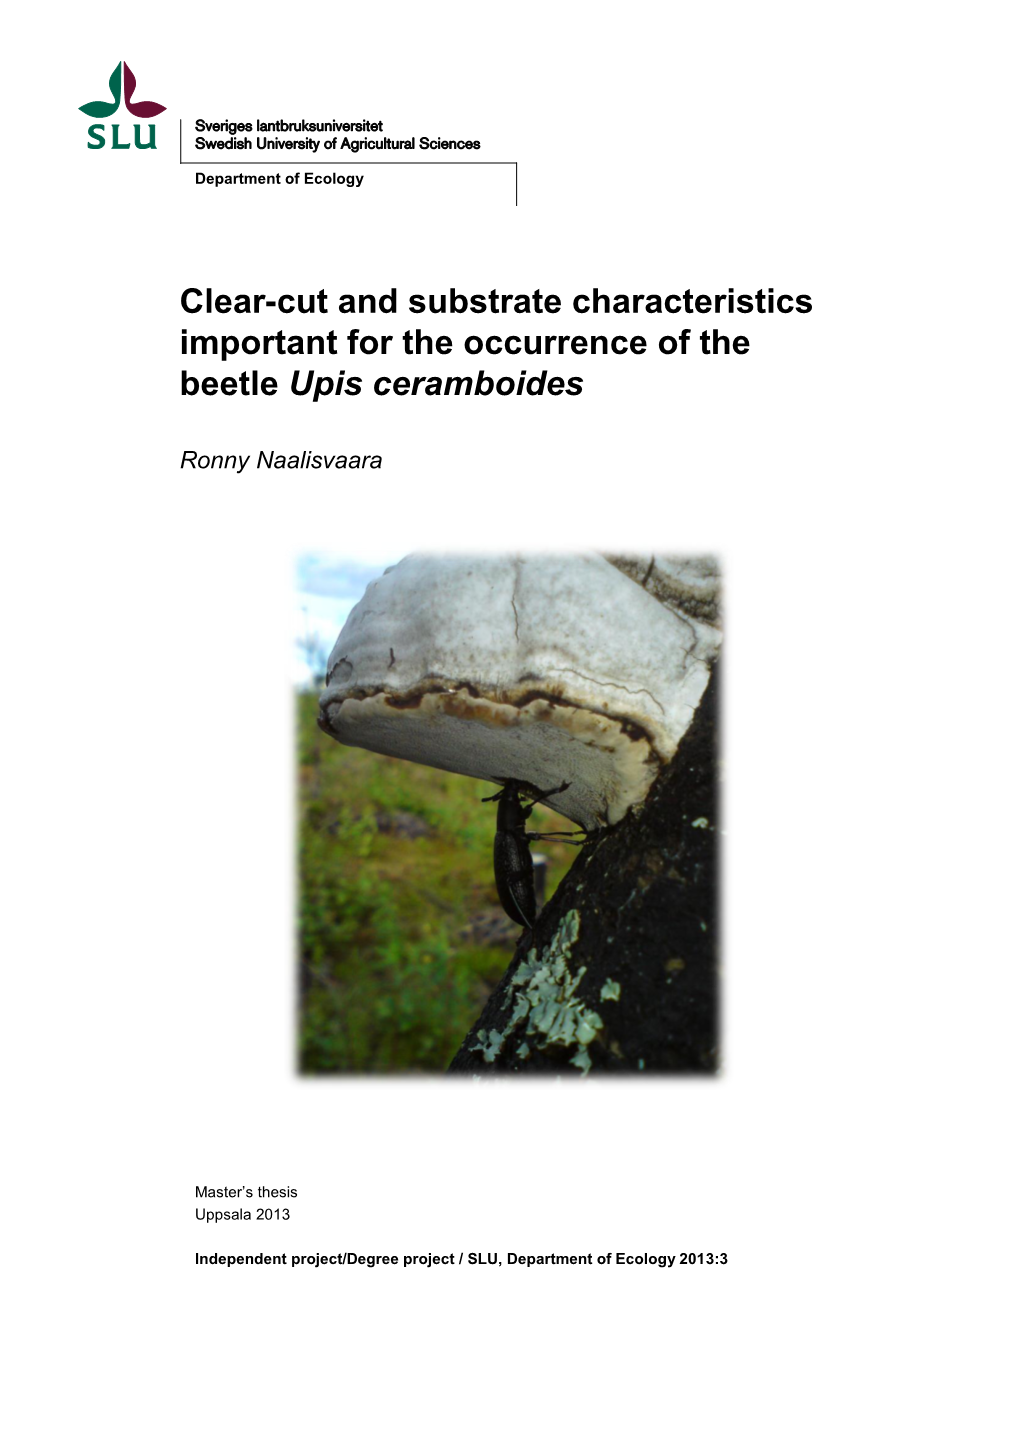 Clear-Cut and Substrate Characteristics Important for the Occurrence of the Beetle Upis Ceramboides